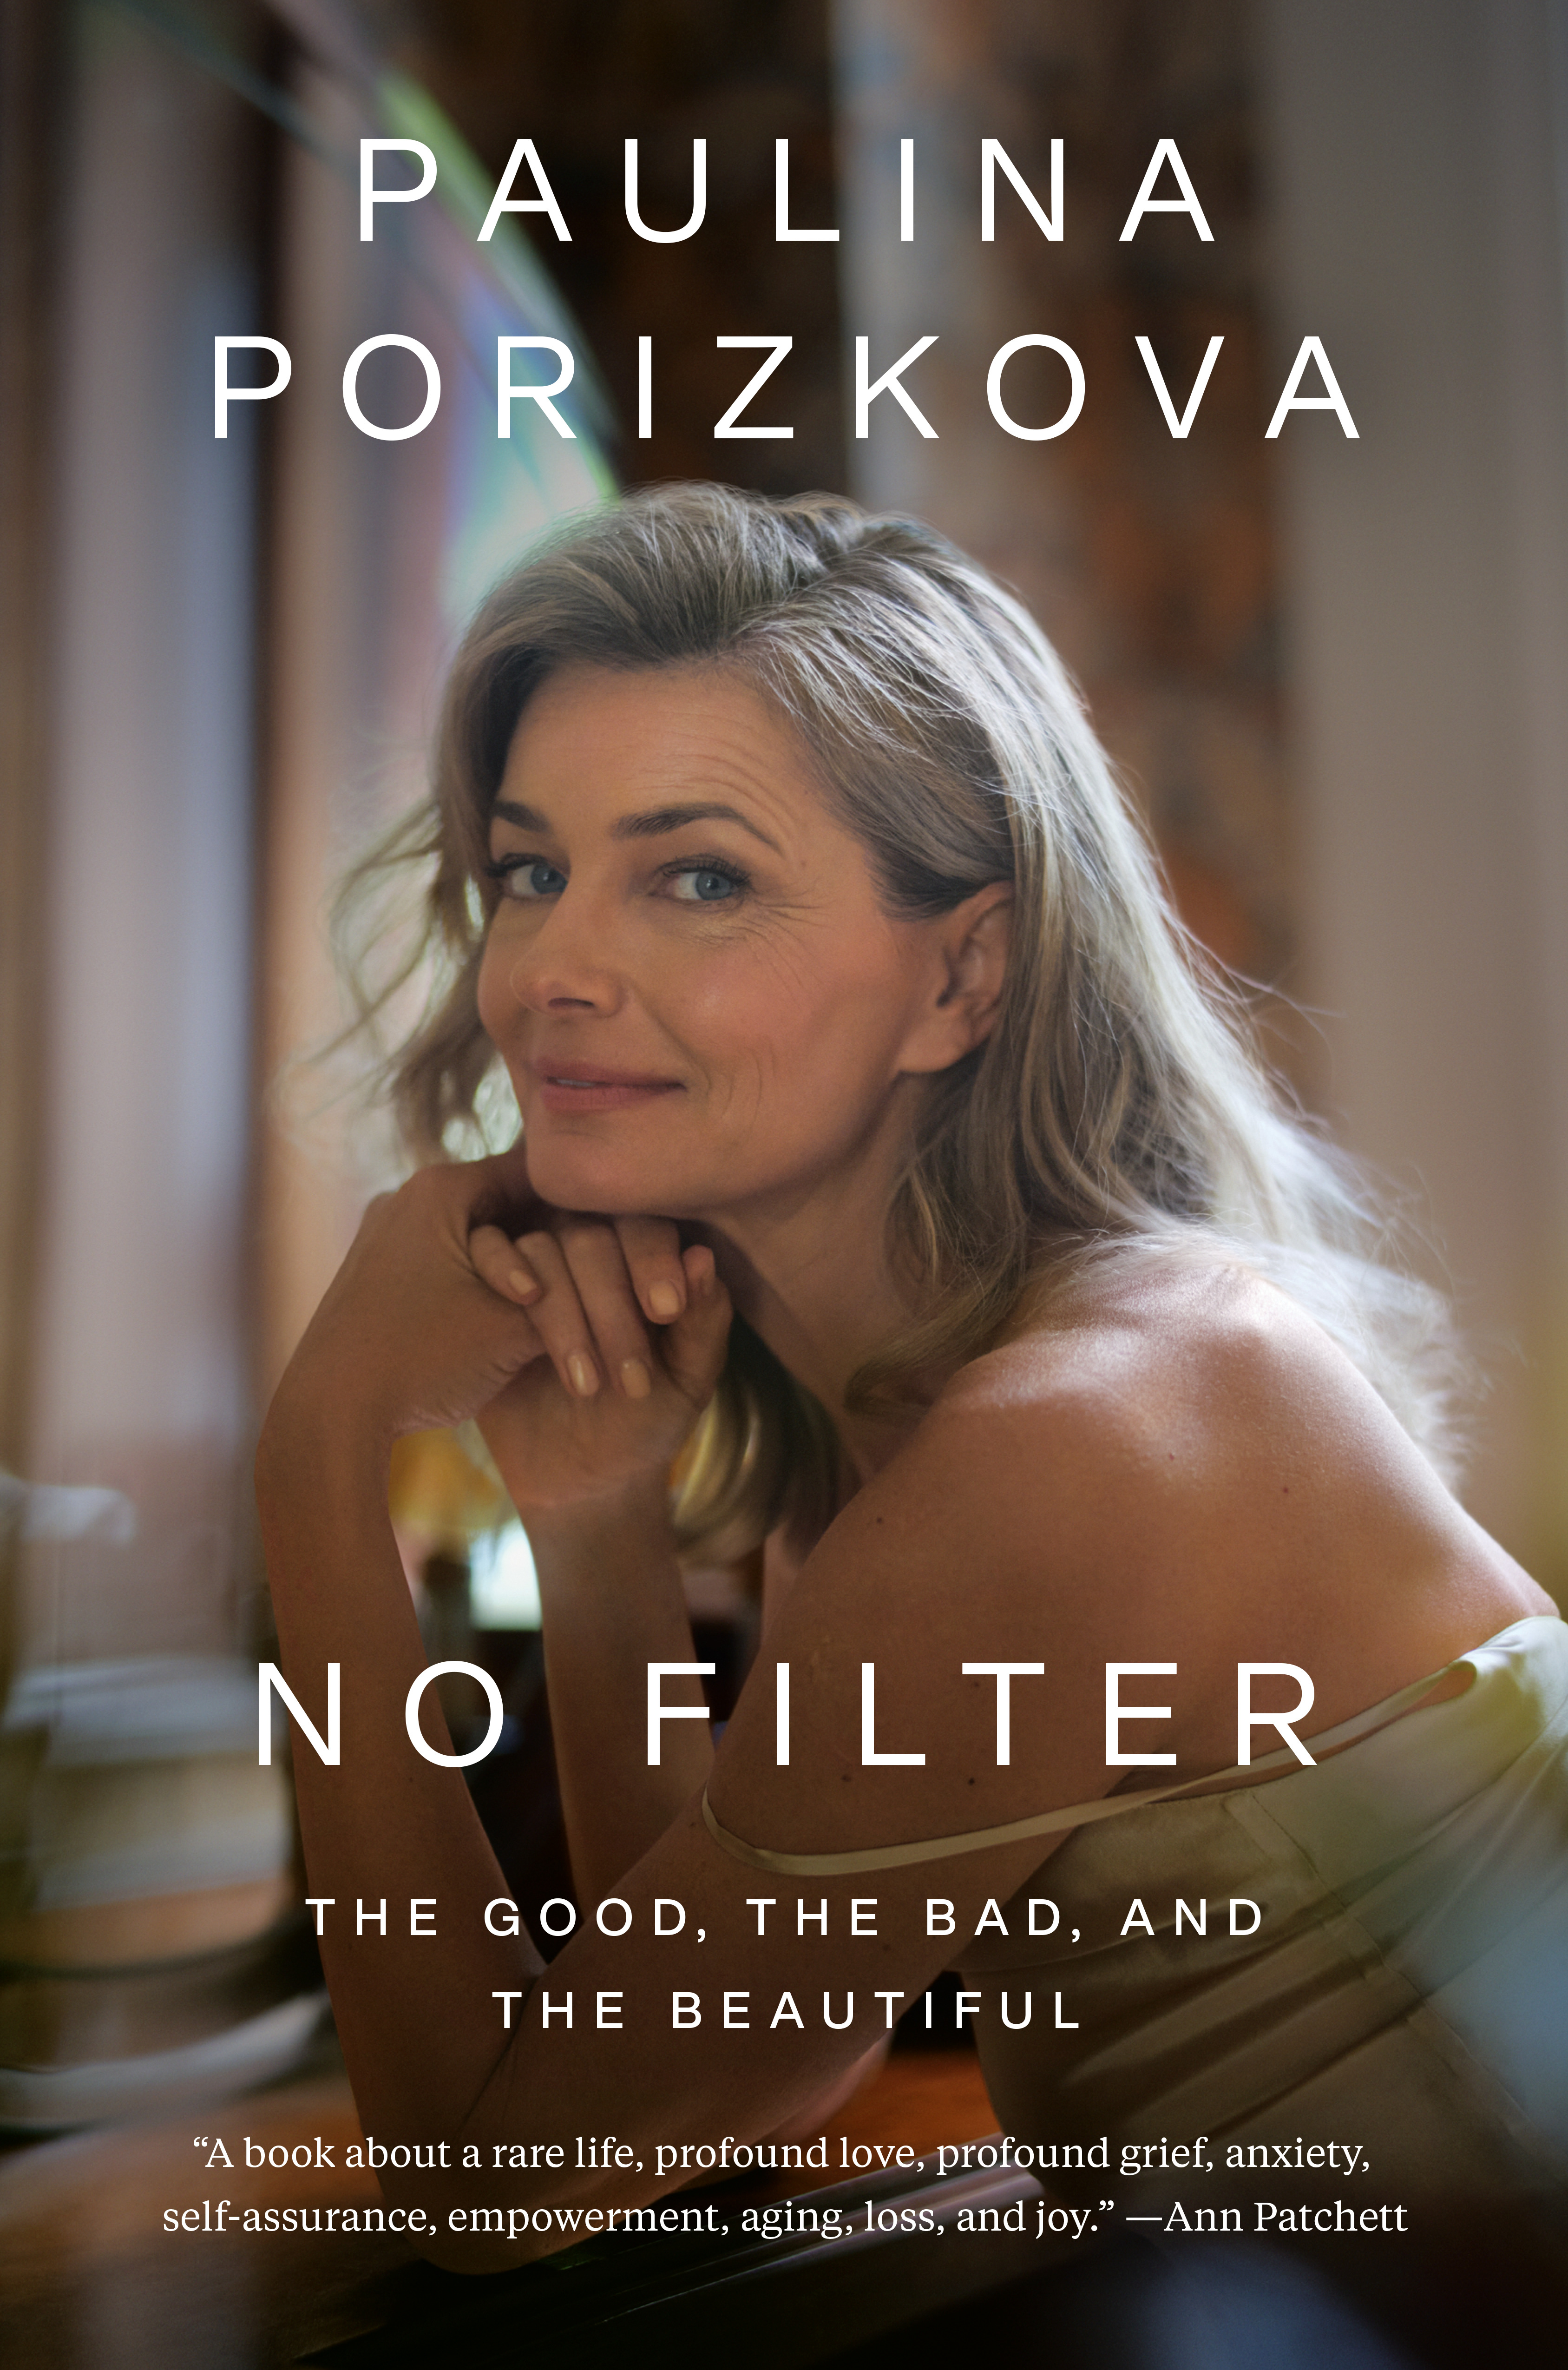 Book Cover for "No Filter: The Good, The Bad and the Beautiful" by Paulina Porizkova